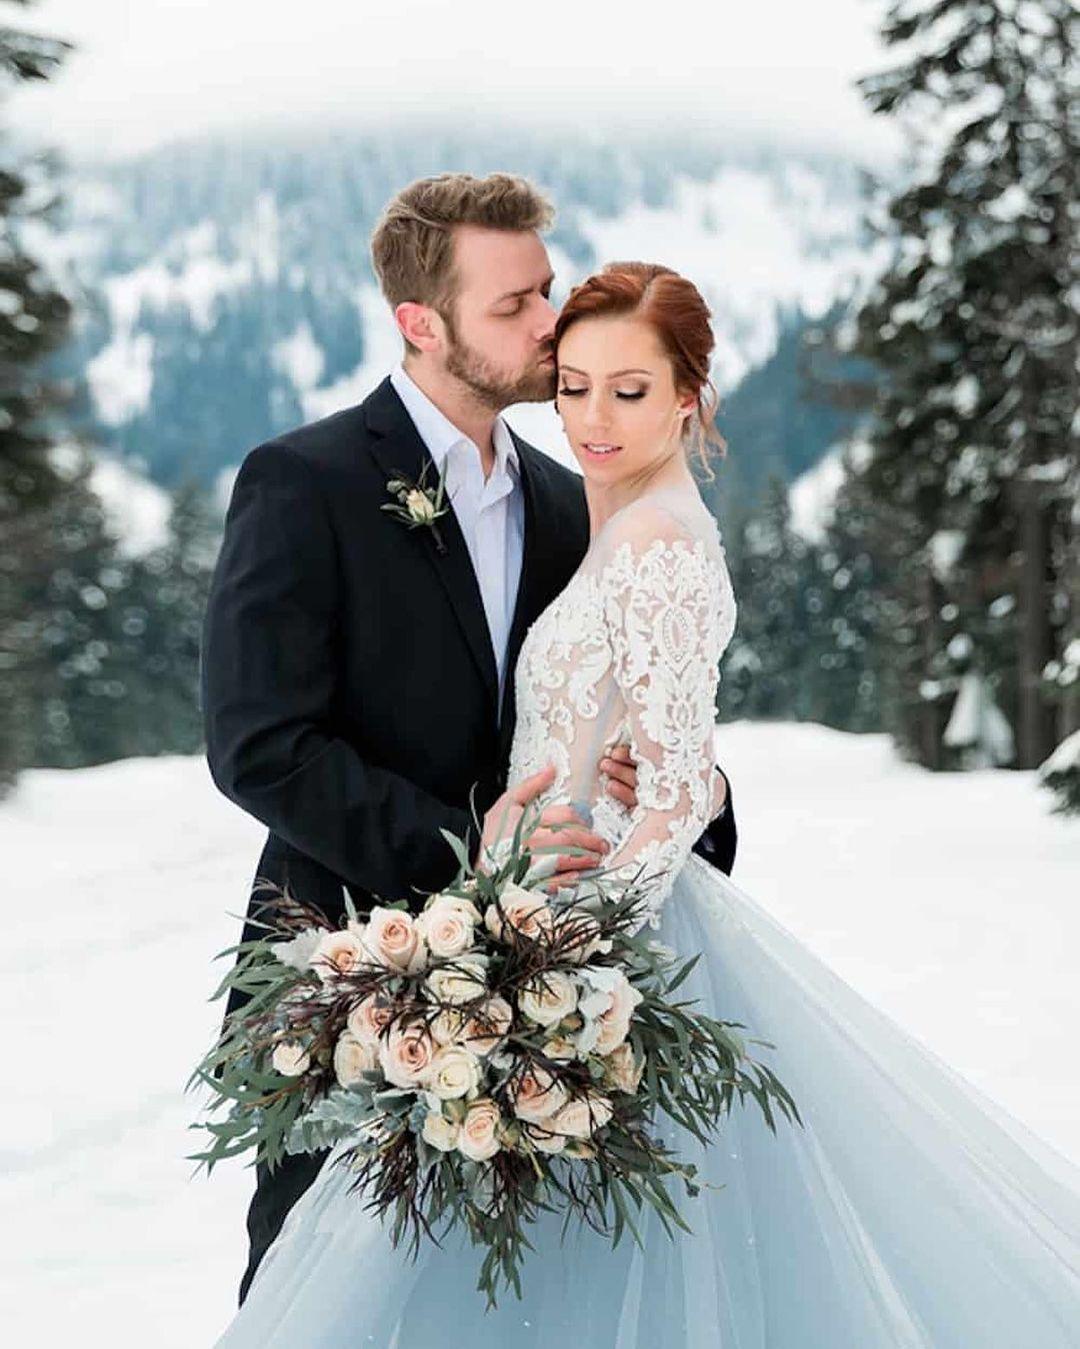 How to Choose Flowers for a Mountain-top Wedding?